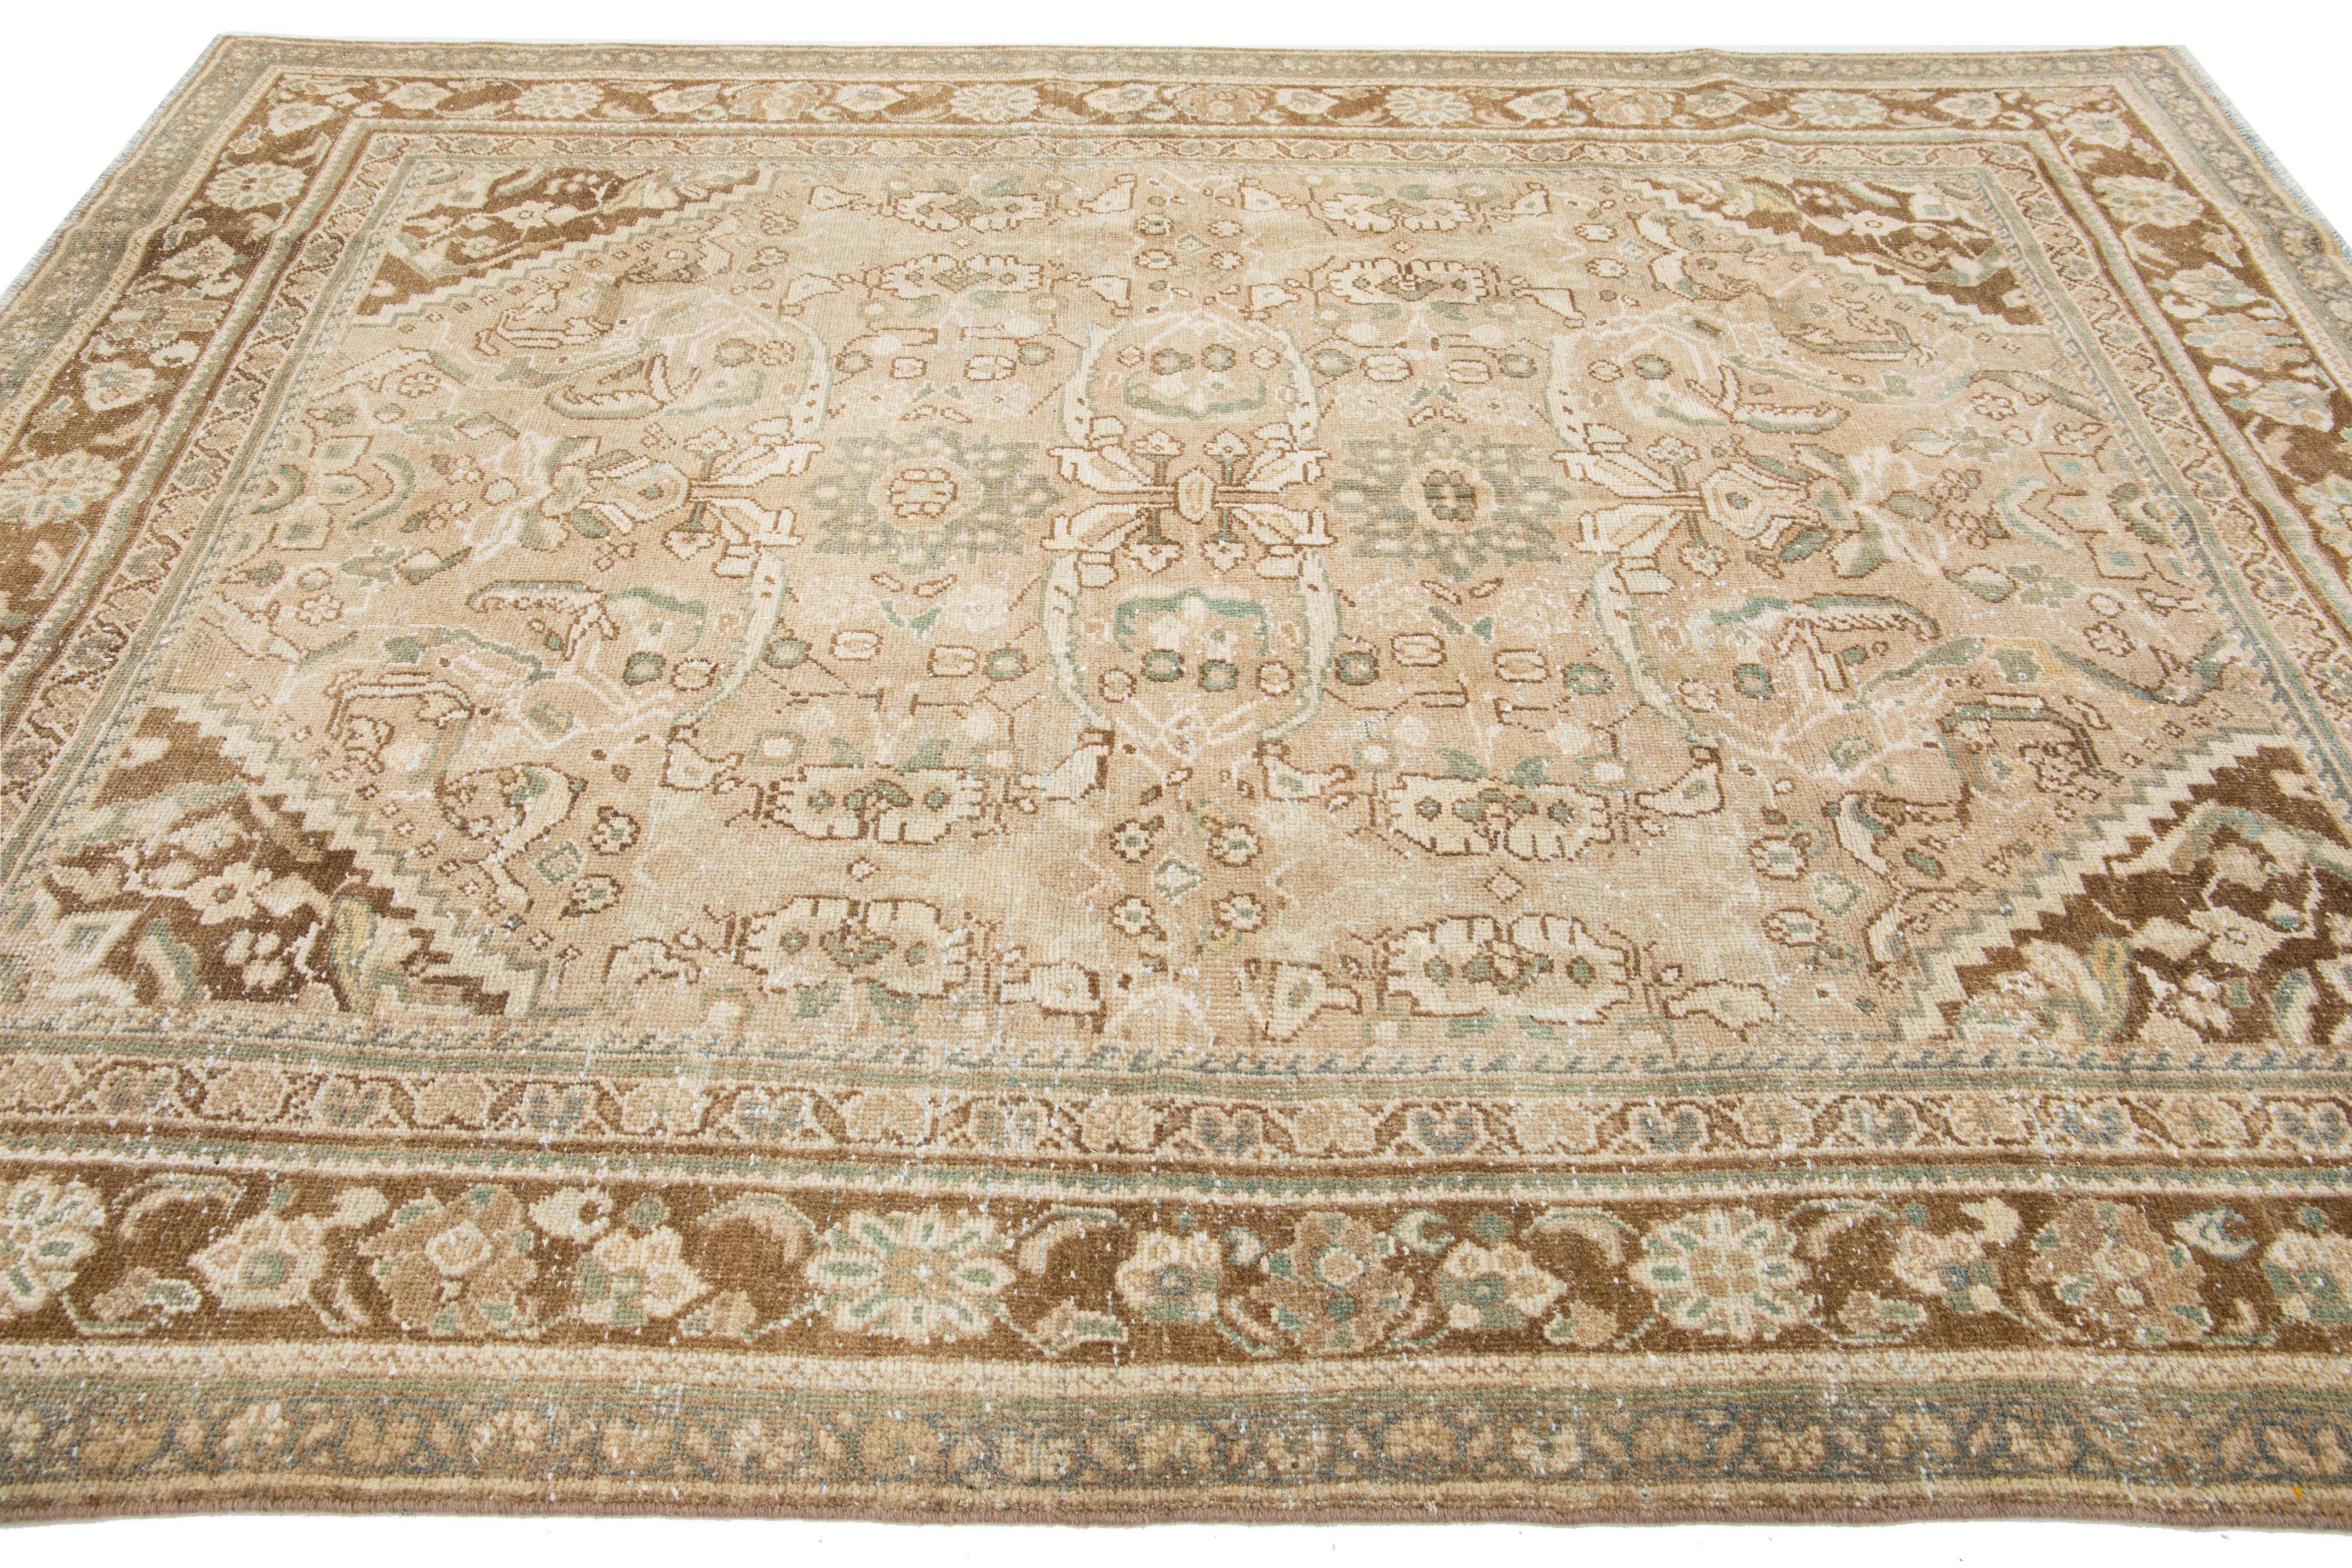 1930s Beige Mahal Persian Wool Rug Handmade With Floral Pattern For Sale 2